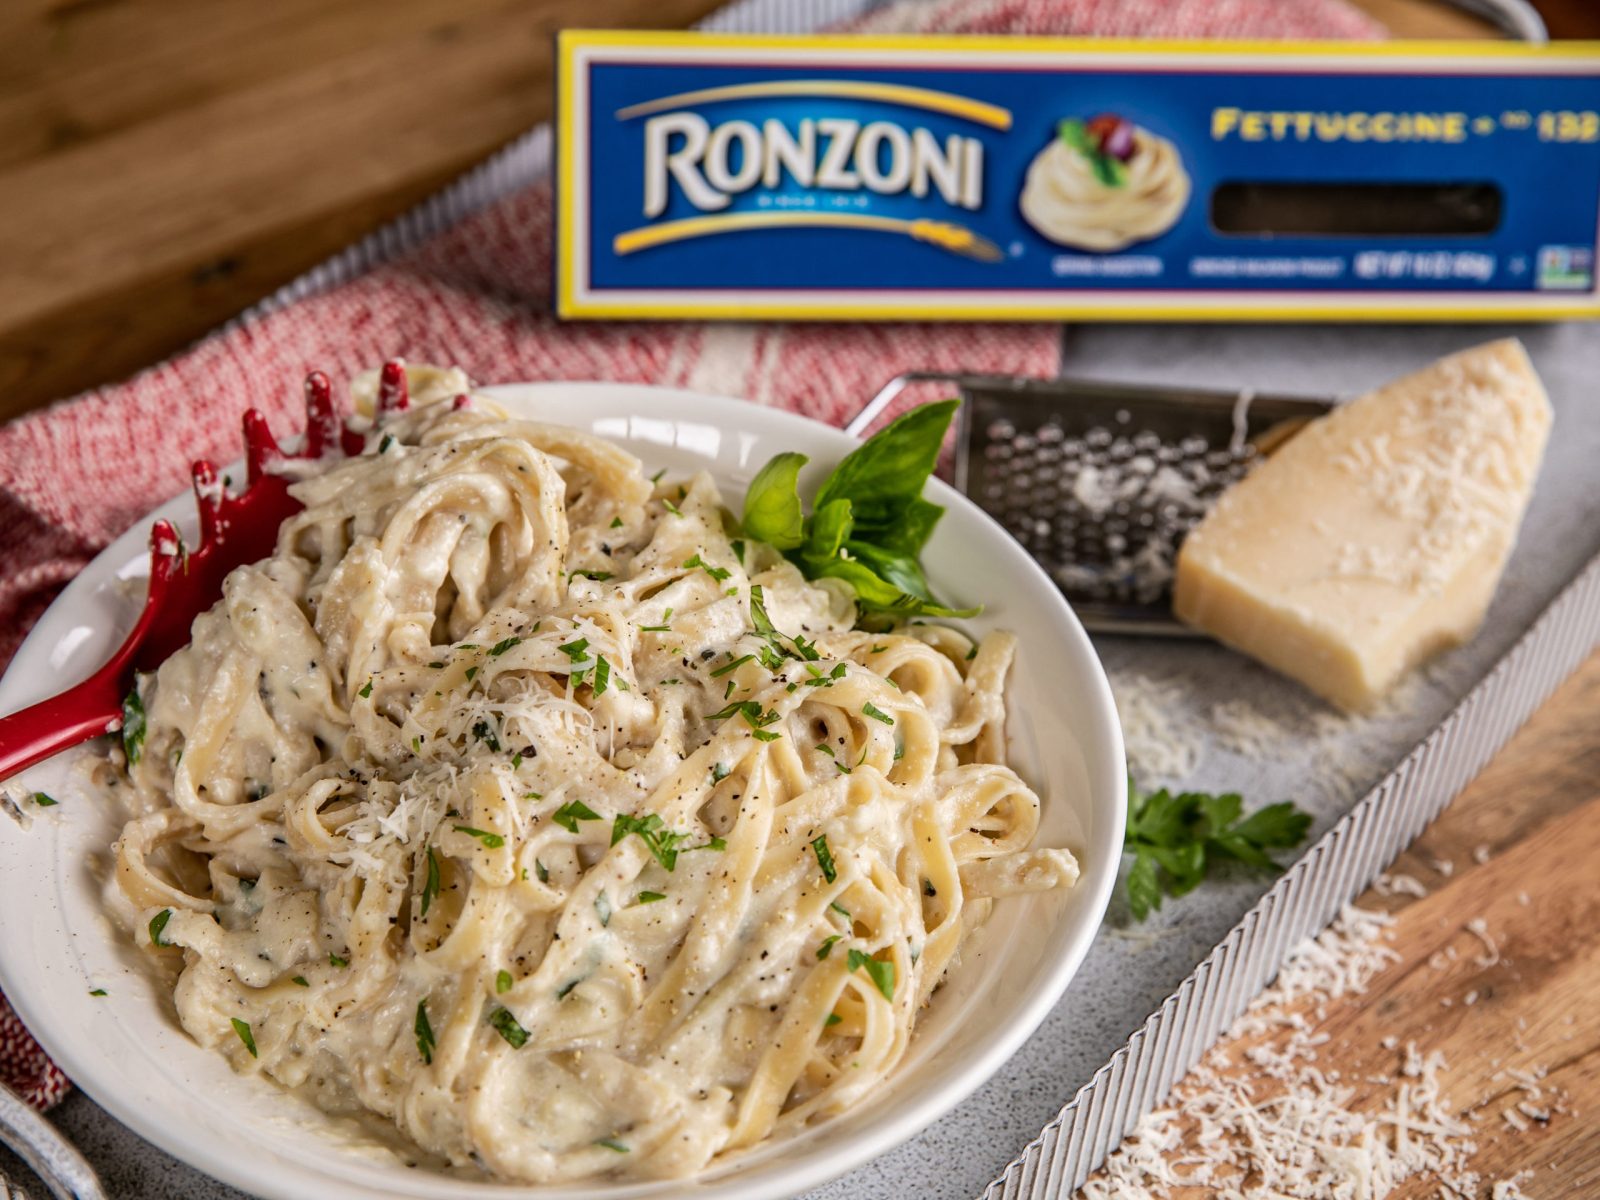 Ronzoni 5-Cheese Fettuccine Is Sure To Be A Family Favorite – Quick, Easy And Delicious!